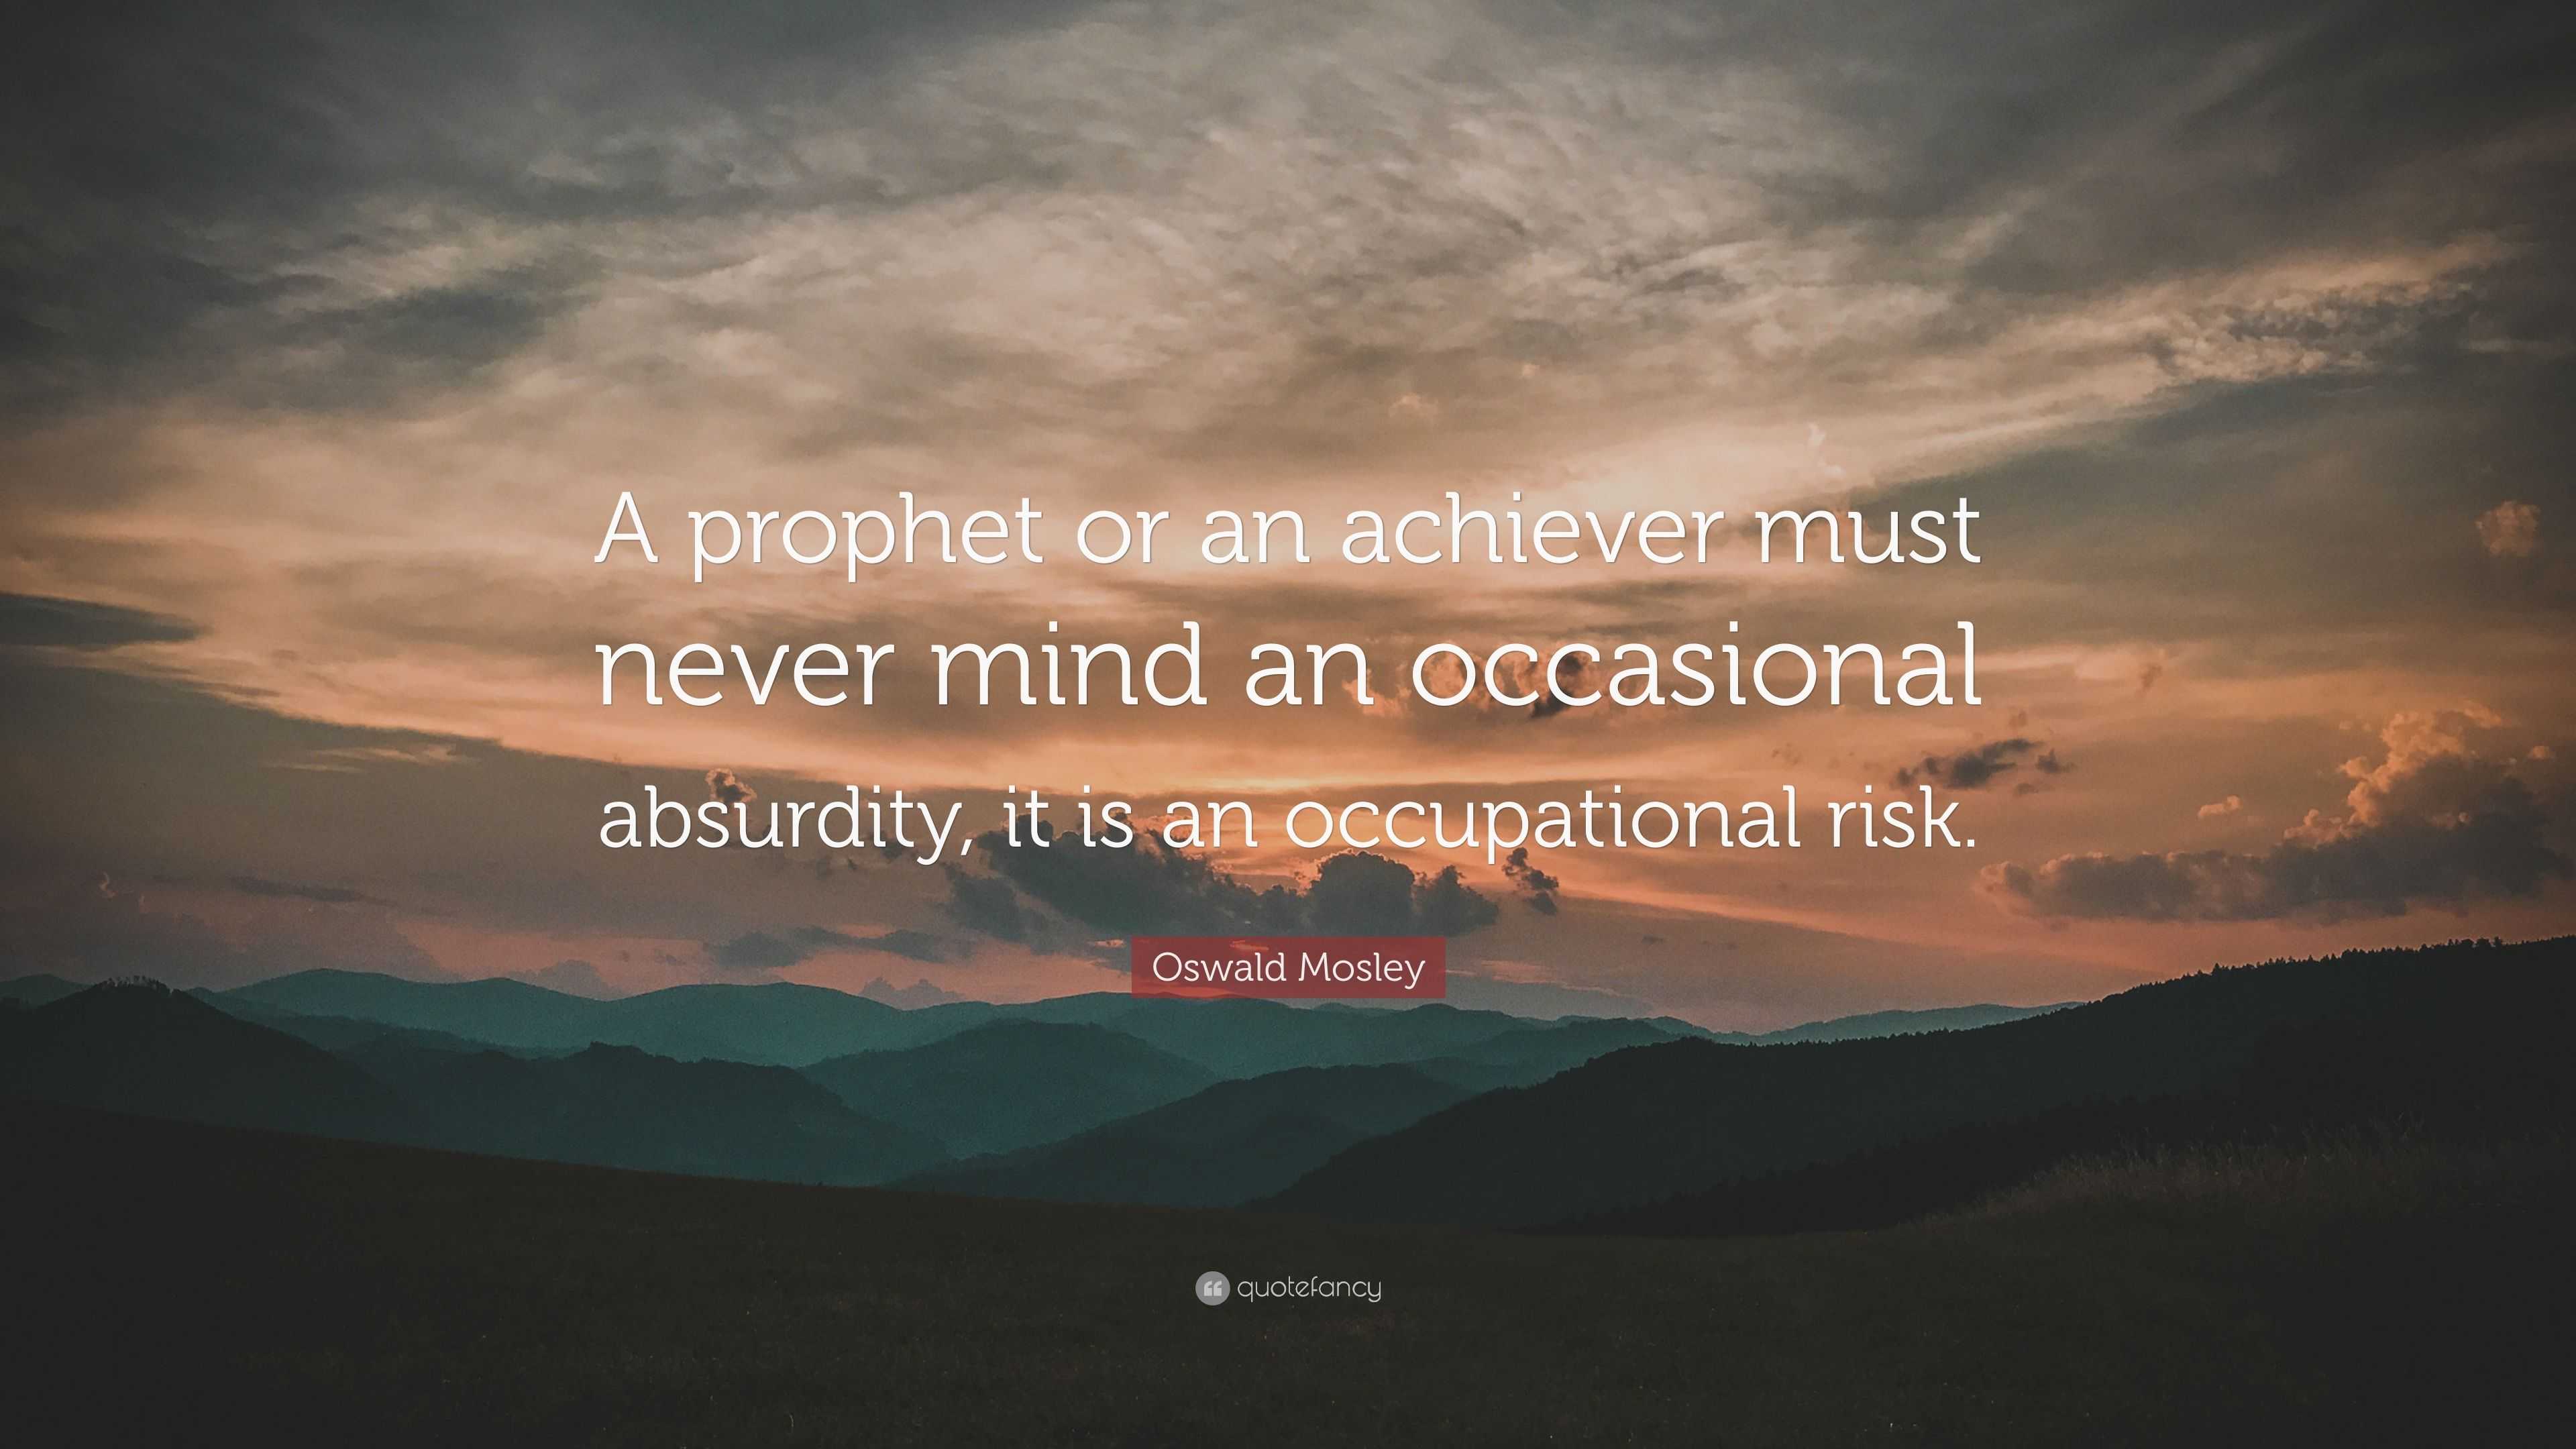 Oswald Mosley Quote: “A prophet or an achiever must never mind an